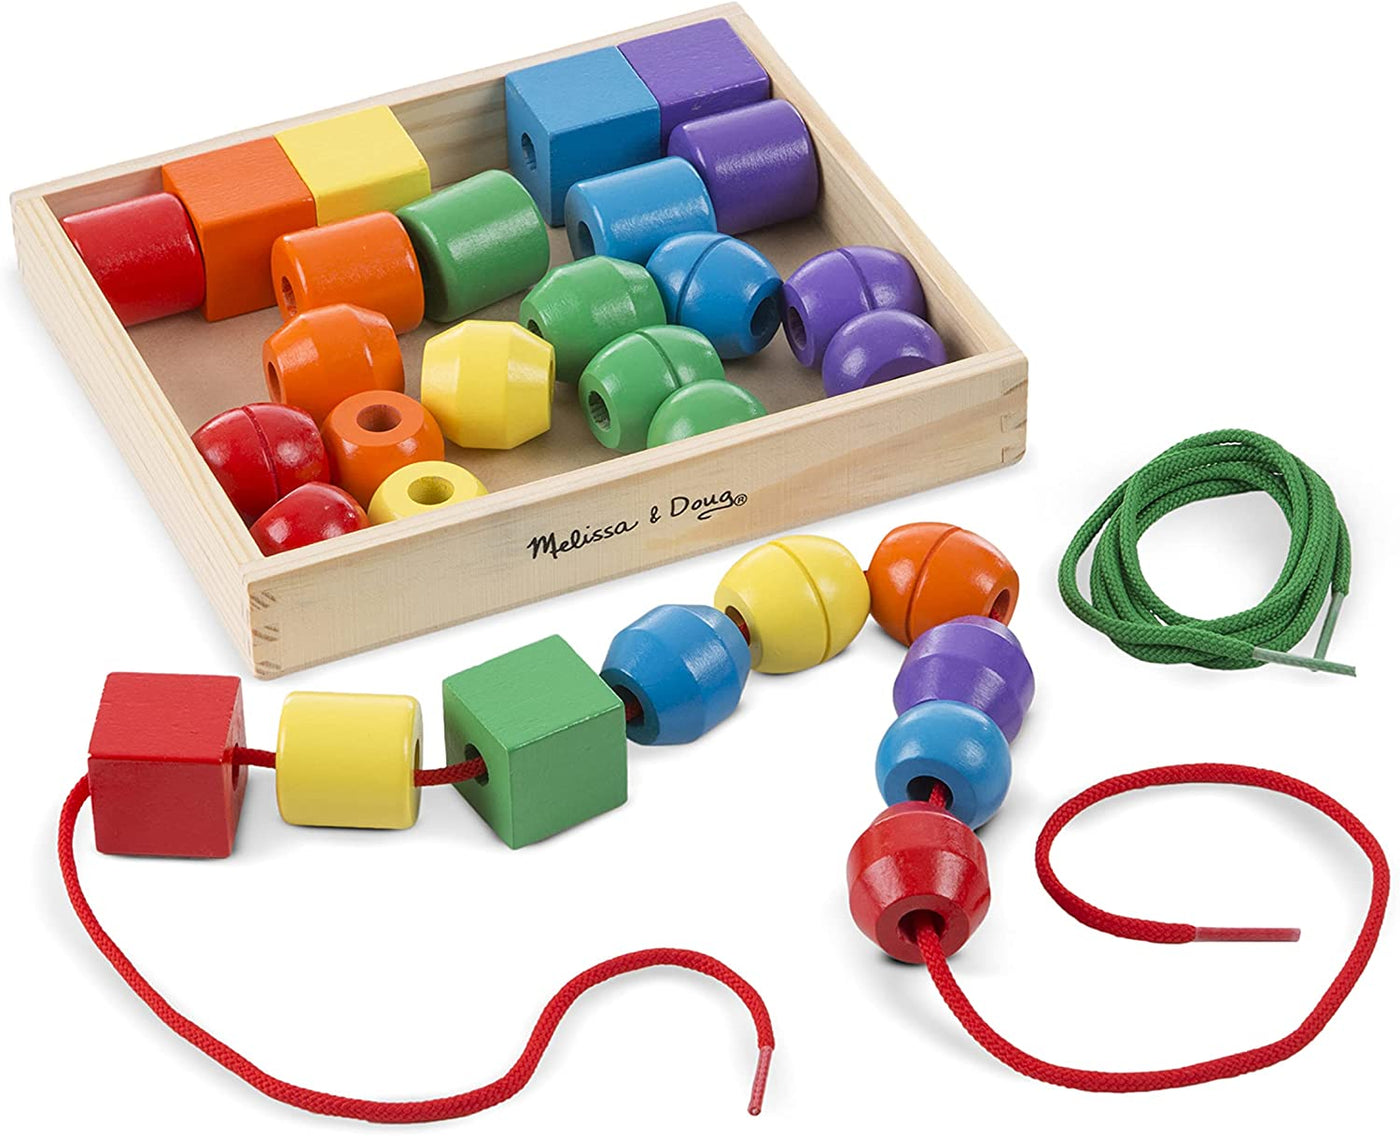 Earthlets.com| Melissa & Doug Blue’s Clues & You! Wooden Lacing Beads - 25 Beads, 4 Cords | Wooden Toy | Developmental Play for Kids | 4 and Above | Gift for Boys or Girls | FSC-Certified Materials | Earthlets.com |  